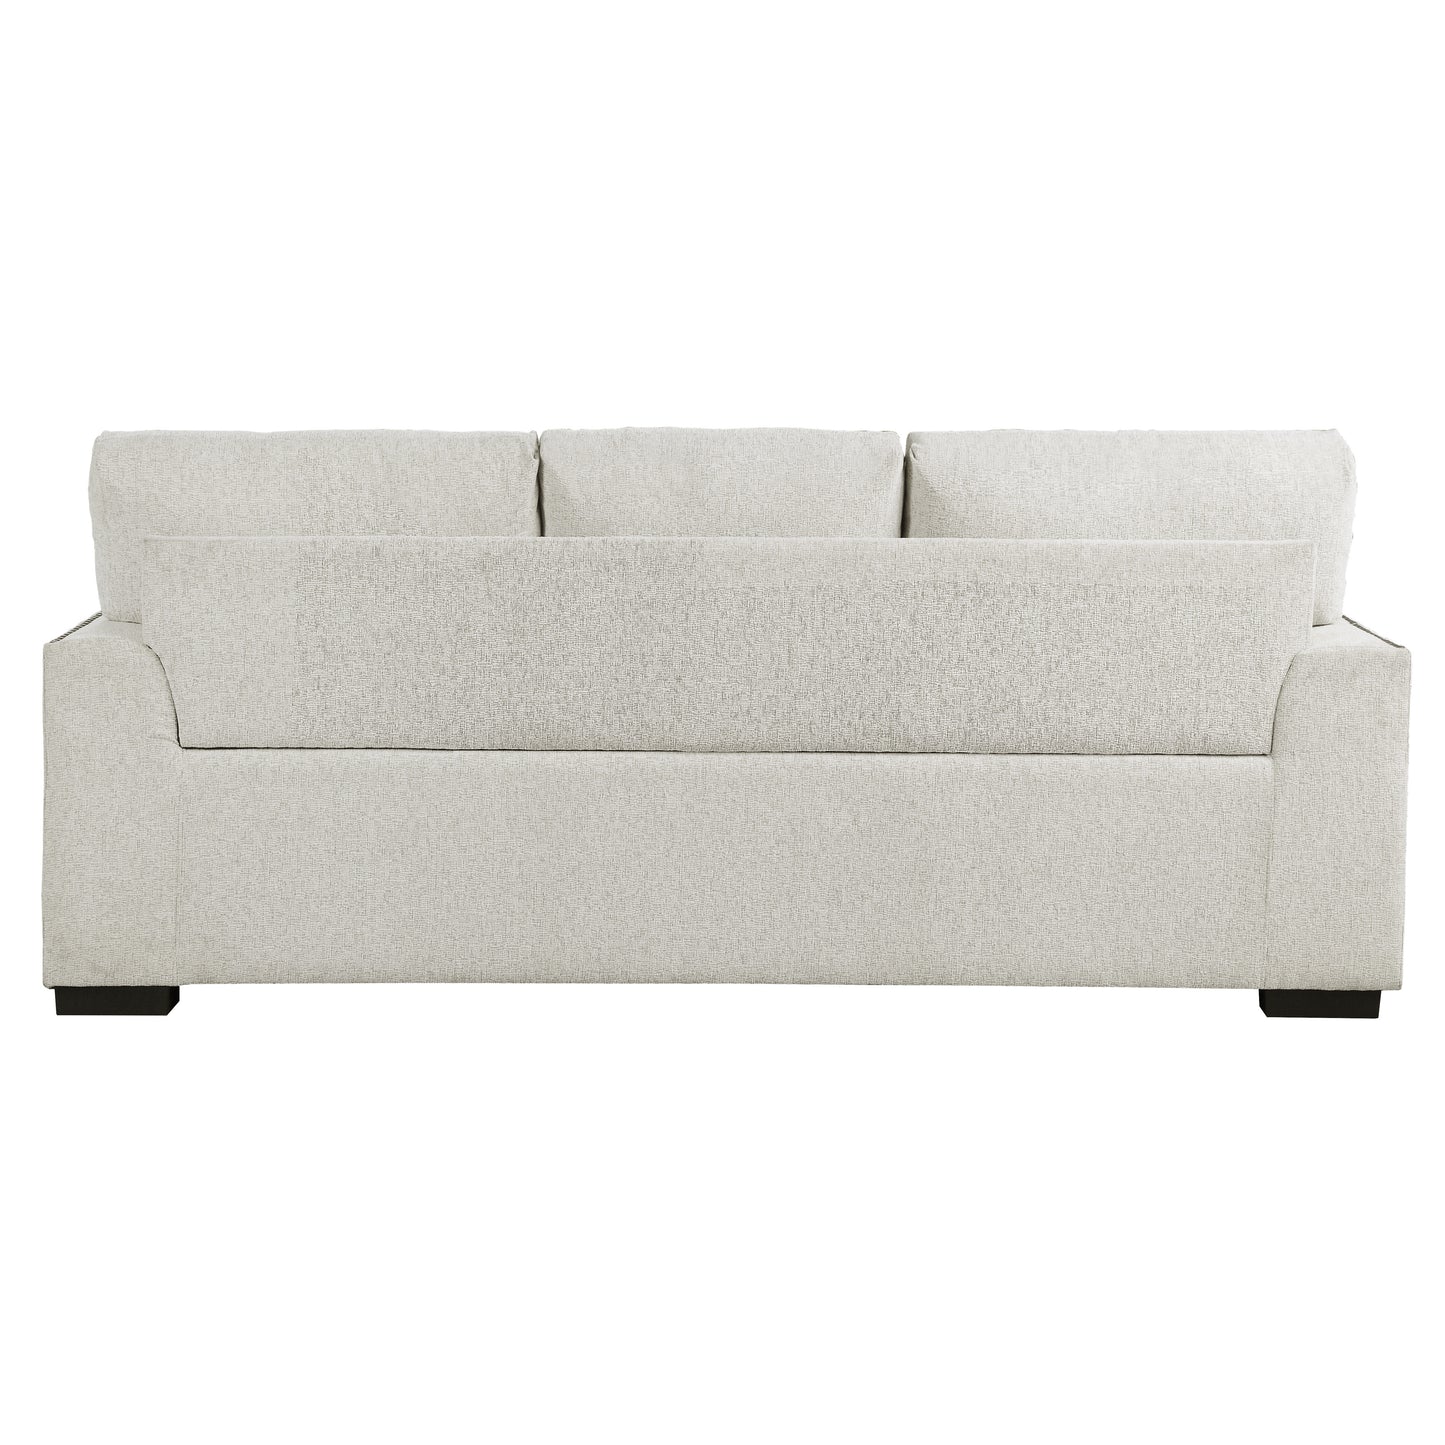 9468BE Seating-Morelia Collection (Sofa, love seat & chair)